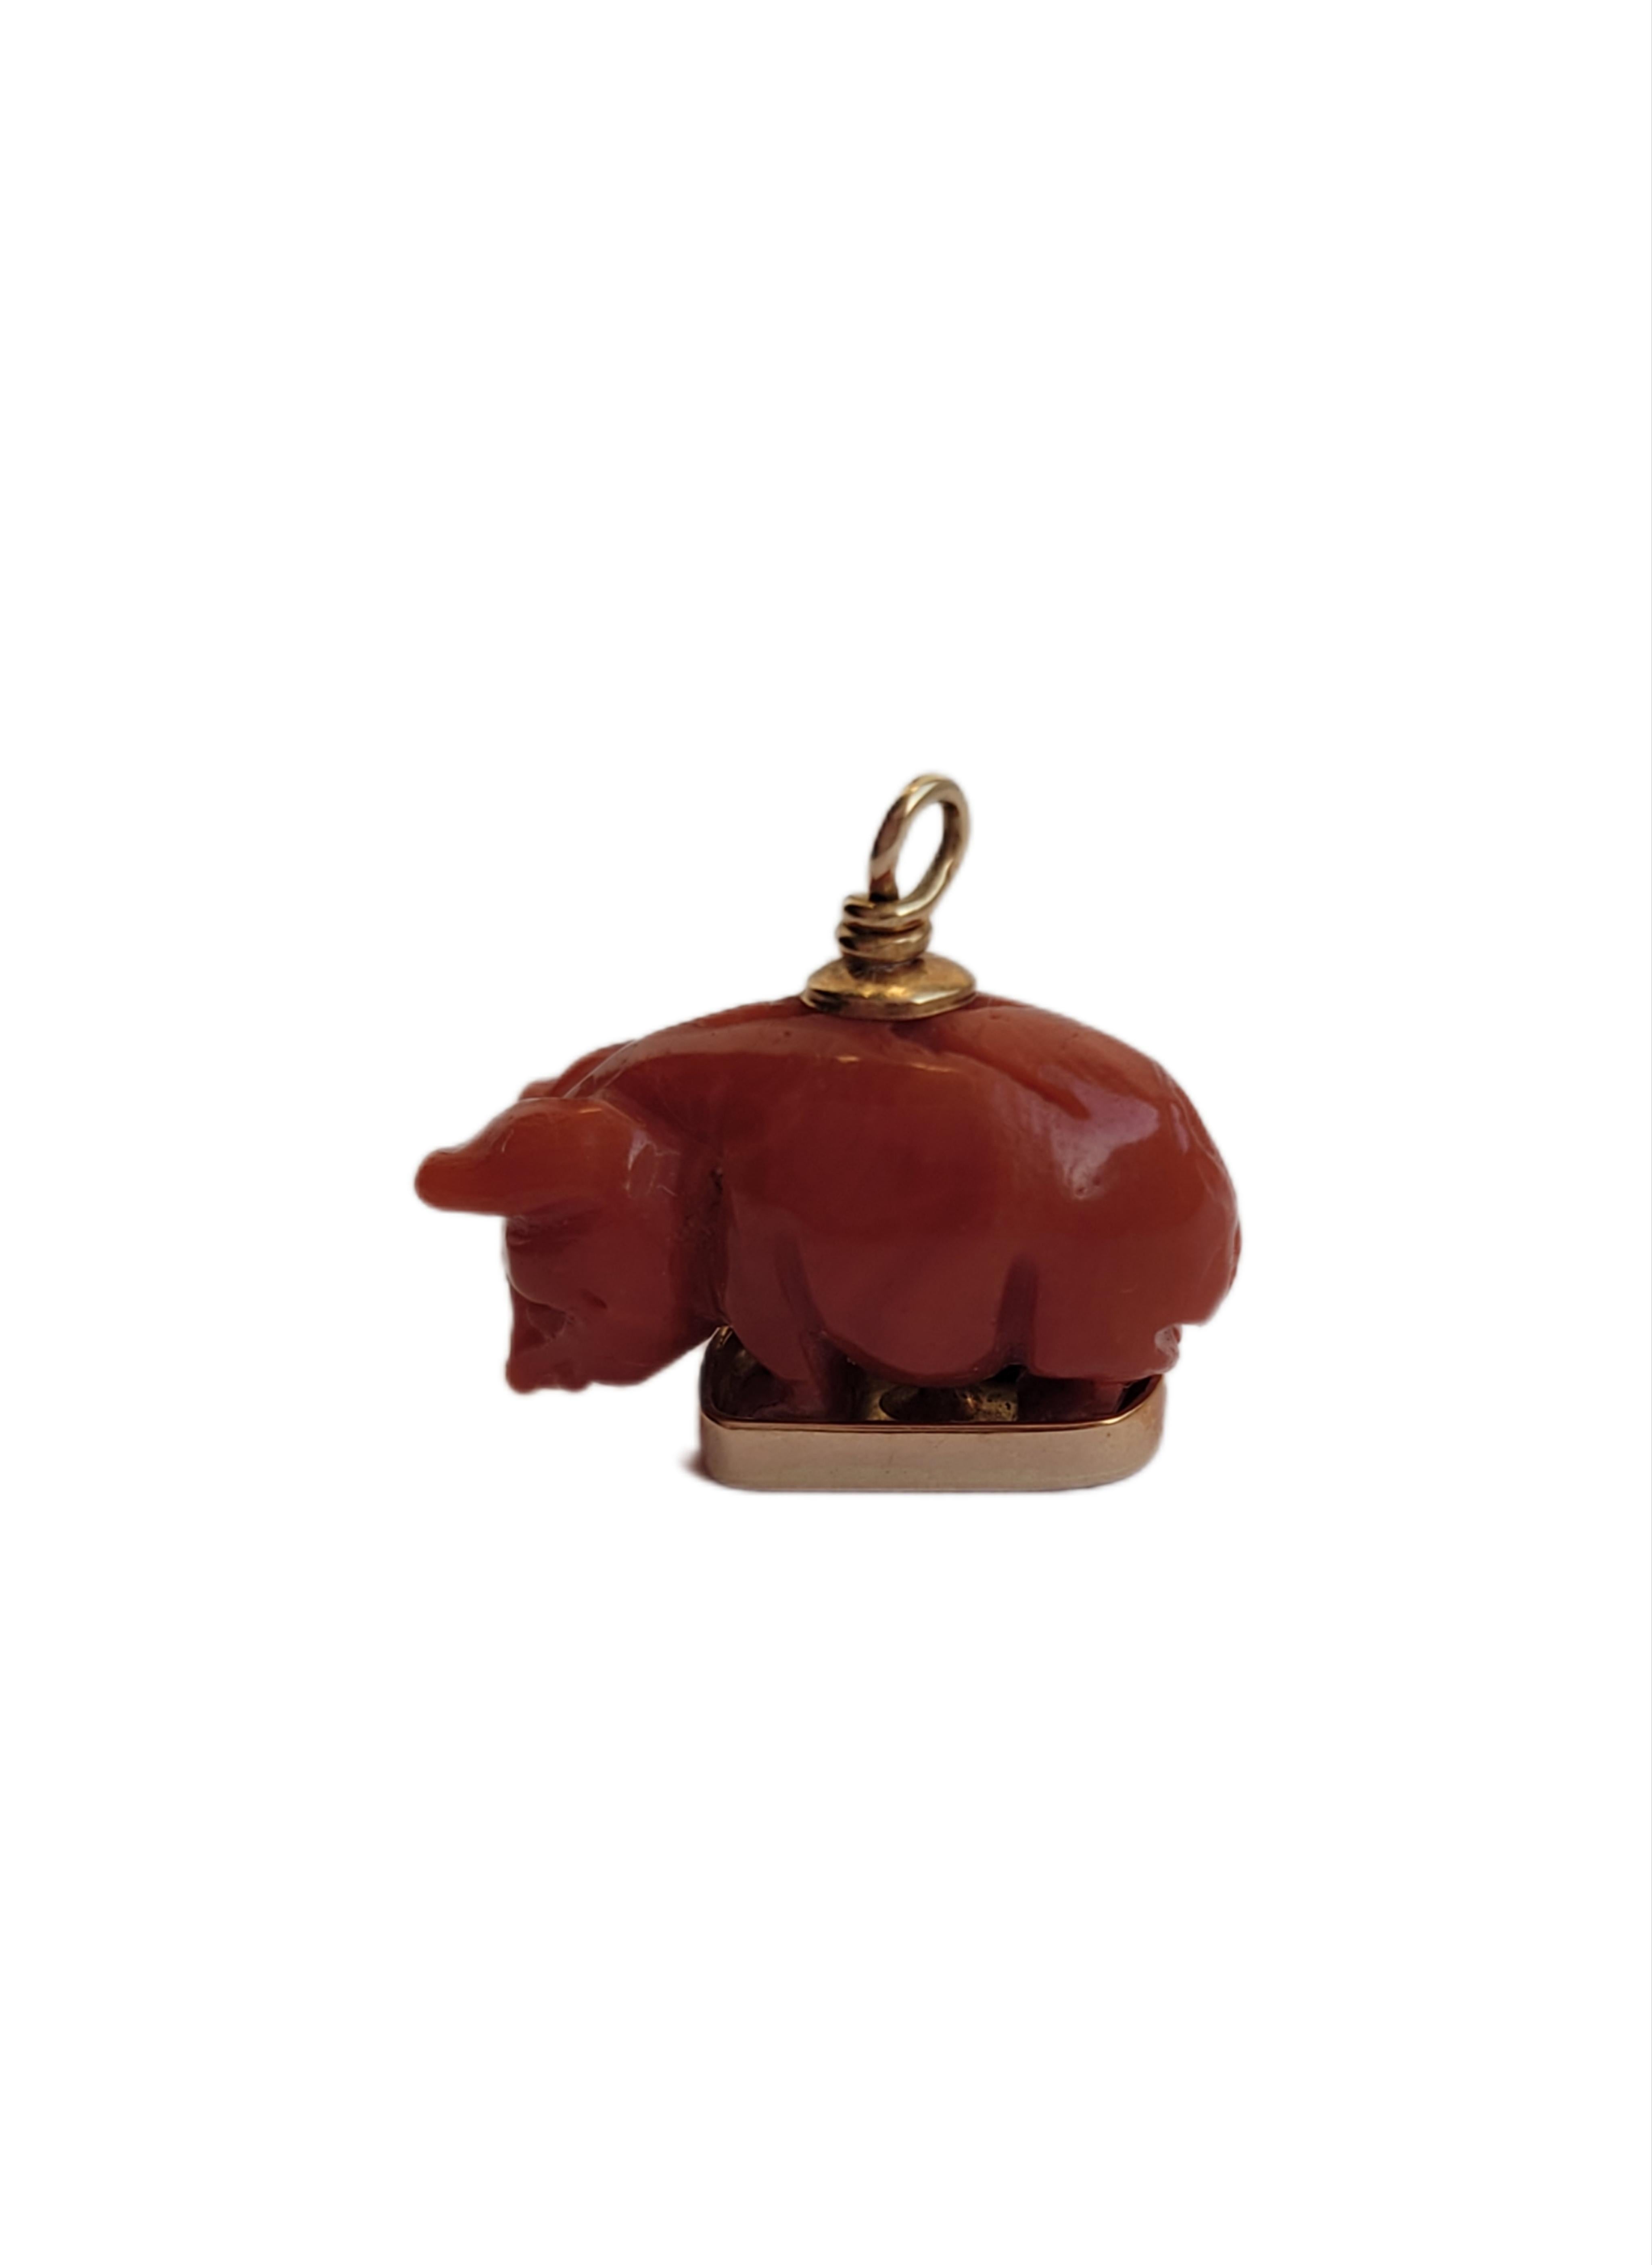 18 Karat Gold Carved Lucky Pig Charm Pendant Fob 1